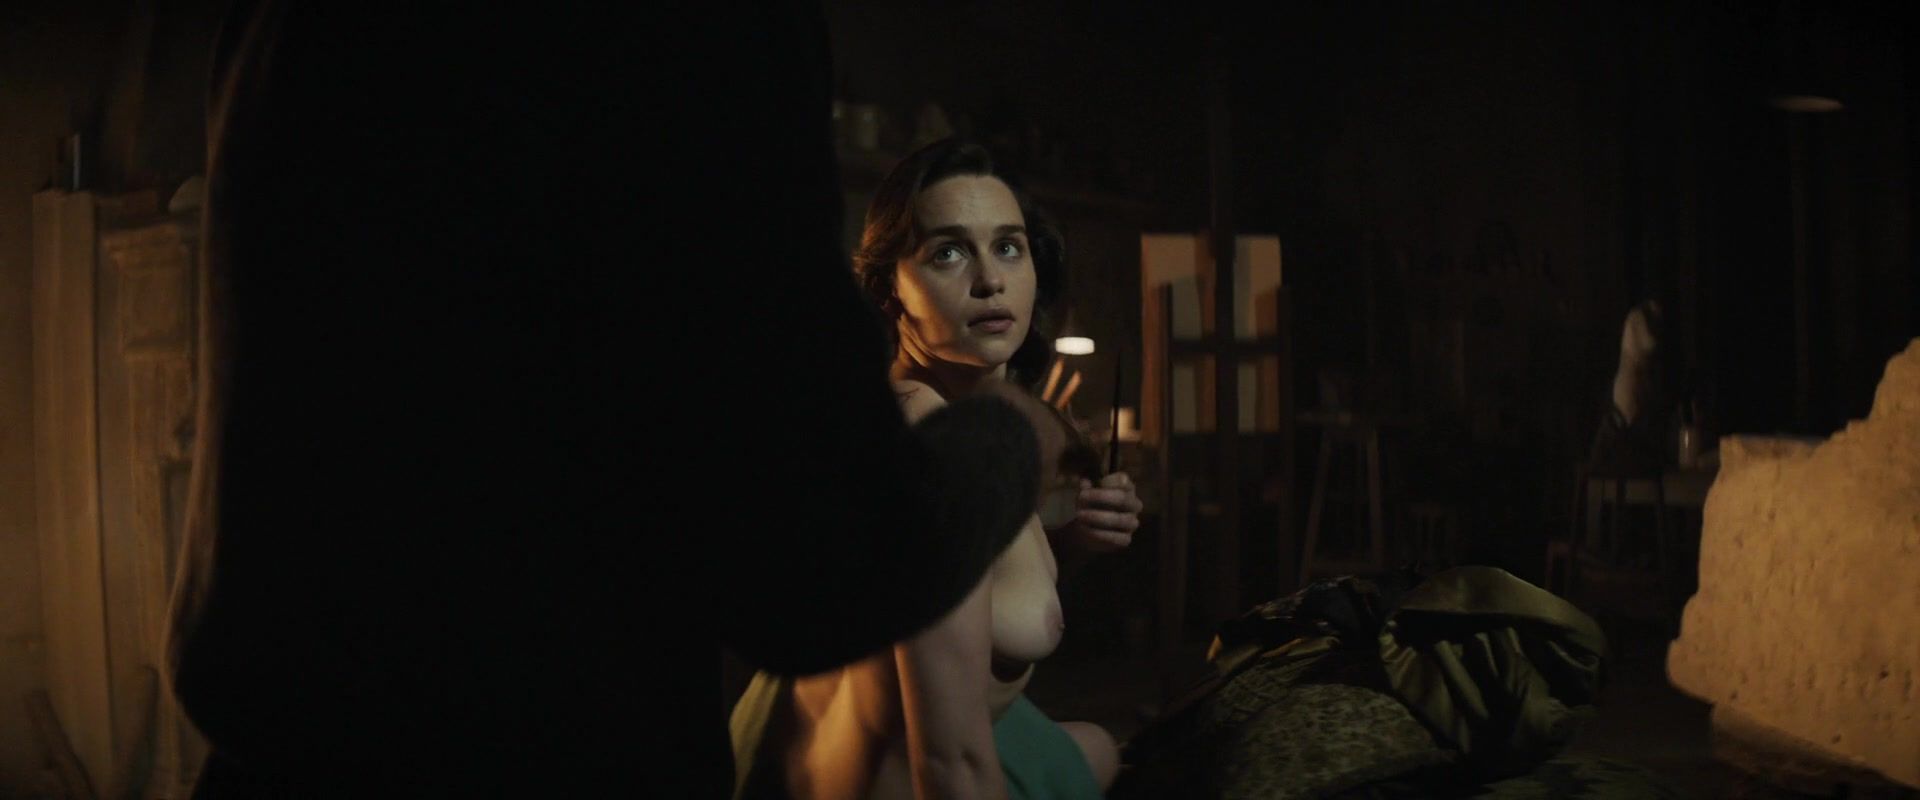 Pierced Naked Emilia Clarke in topless scene of the movie "Voice from the Stone" | Released in 2017 Redbone - 1